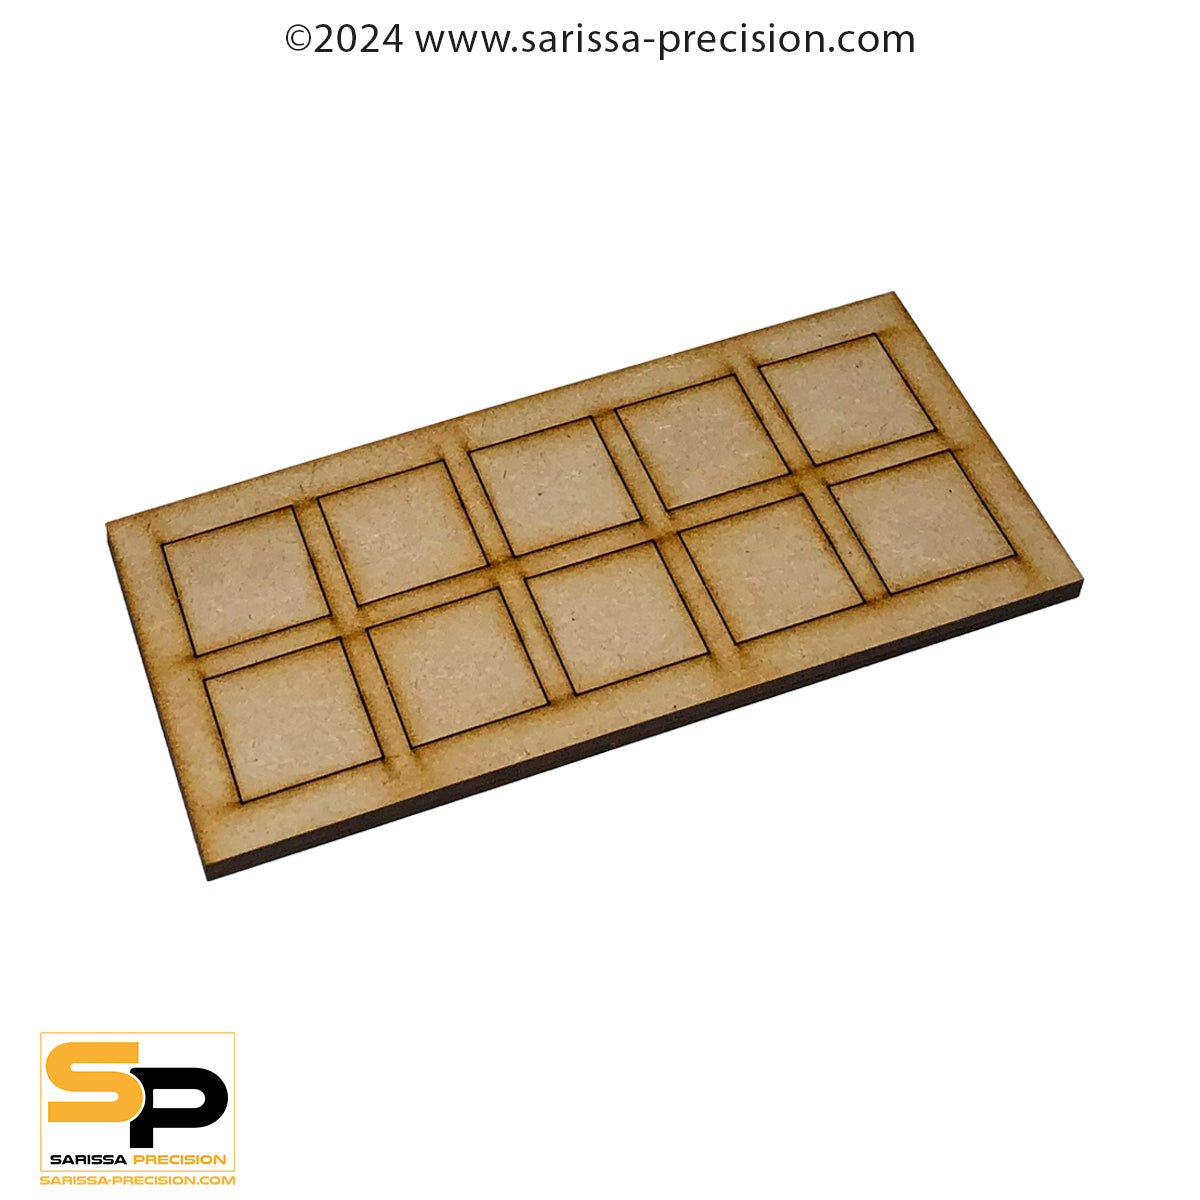 12 x 5 30x30mm Conversion Tray for 25x25mm bases